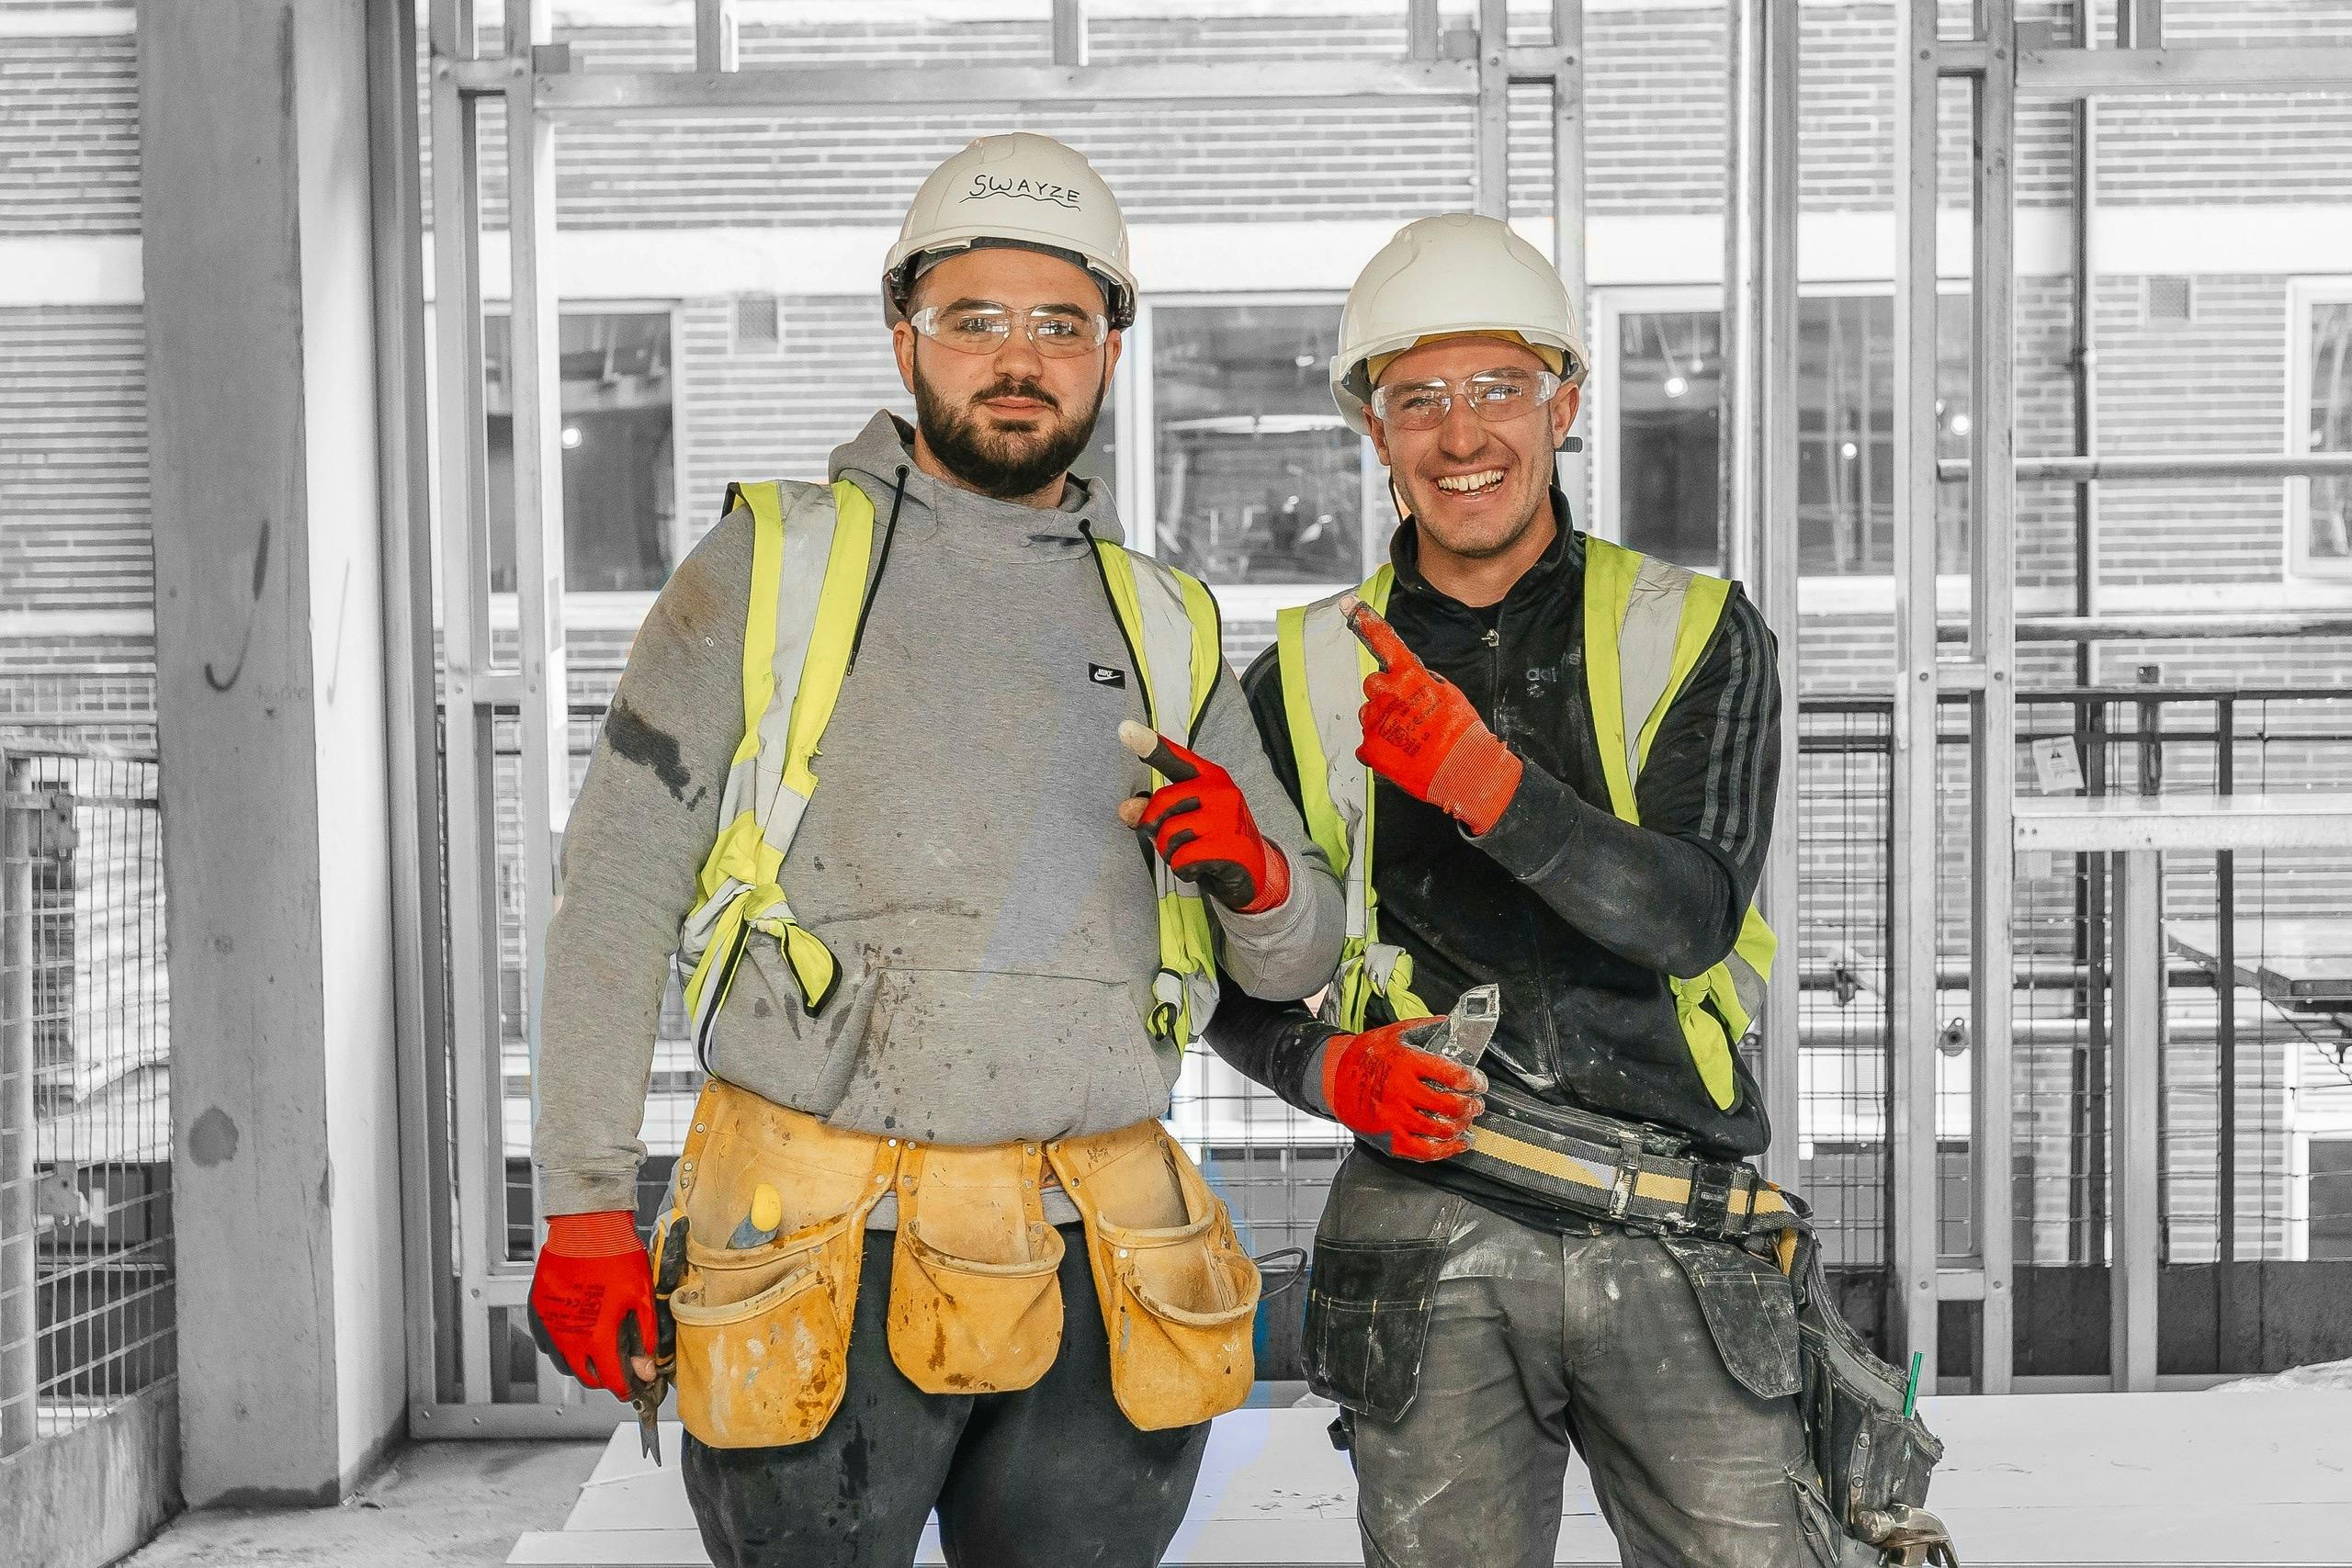 Two construction workers smiling and pointing at each other wearing full protective clothing